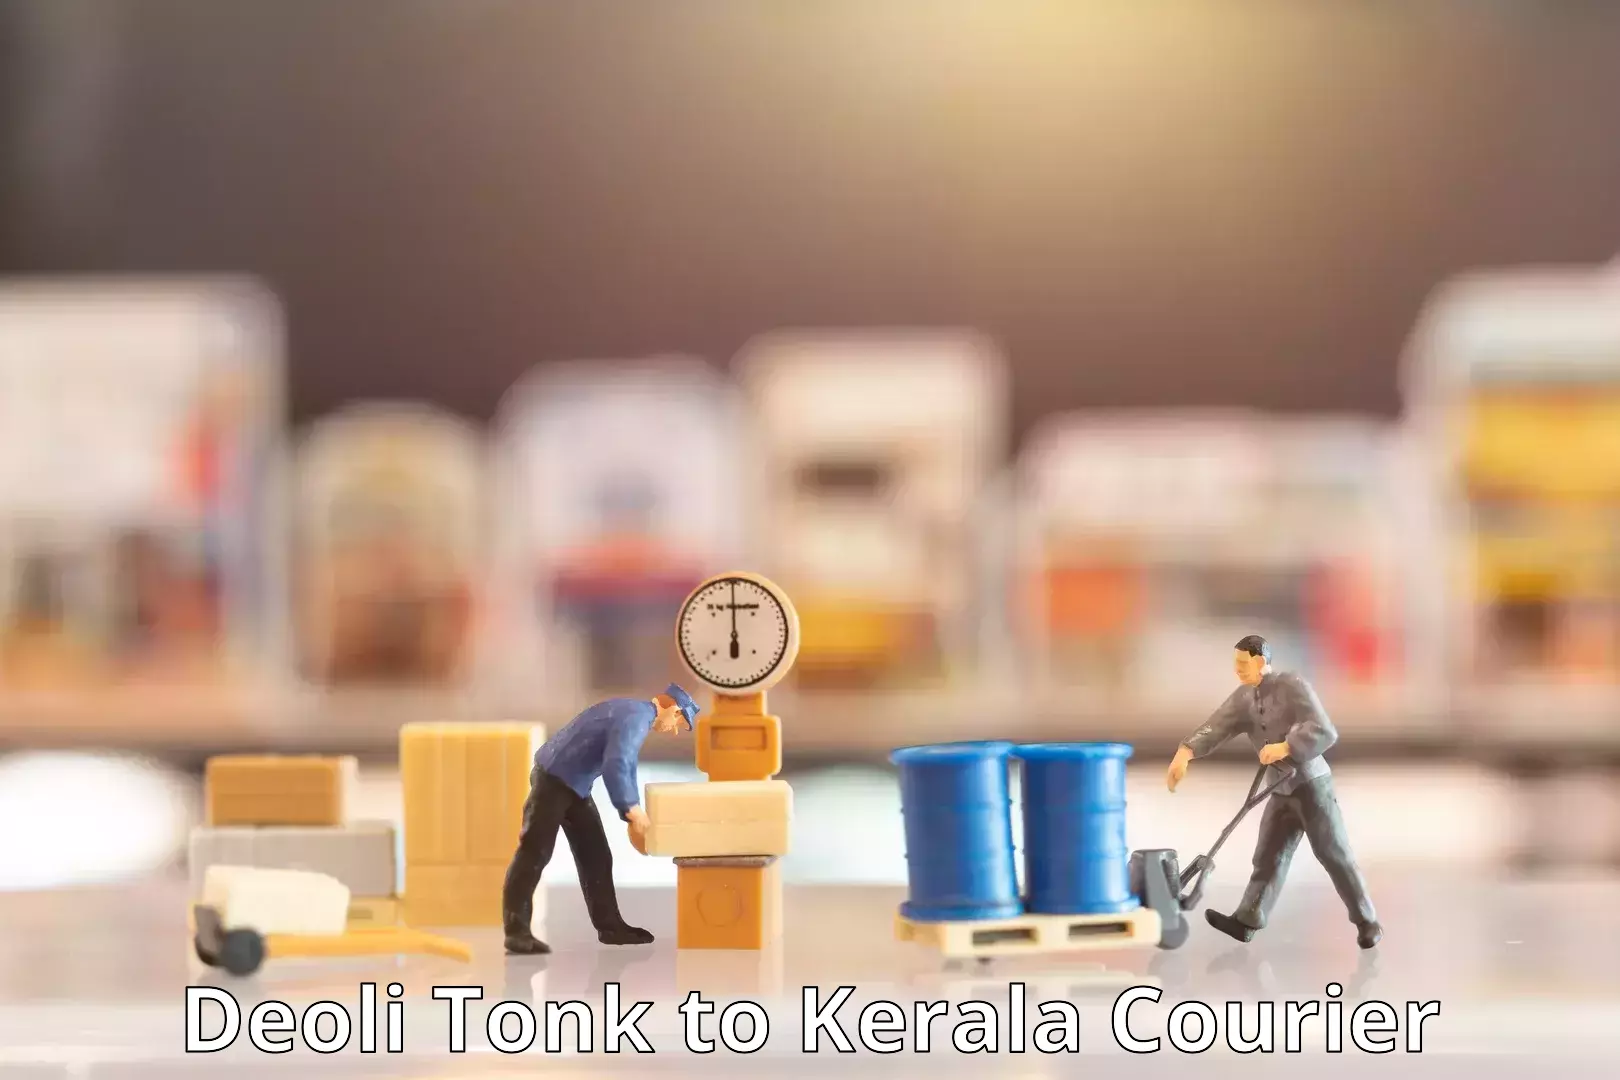 Advanced shipping services Deoli Tonk to Chengannur